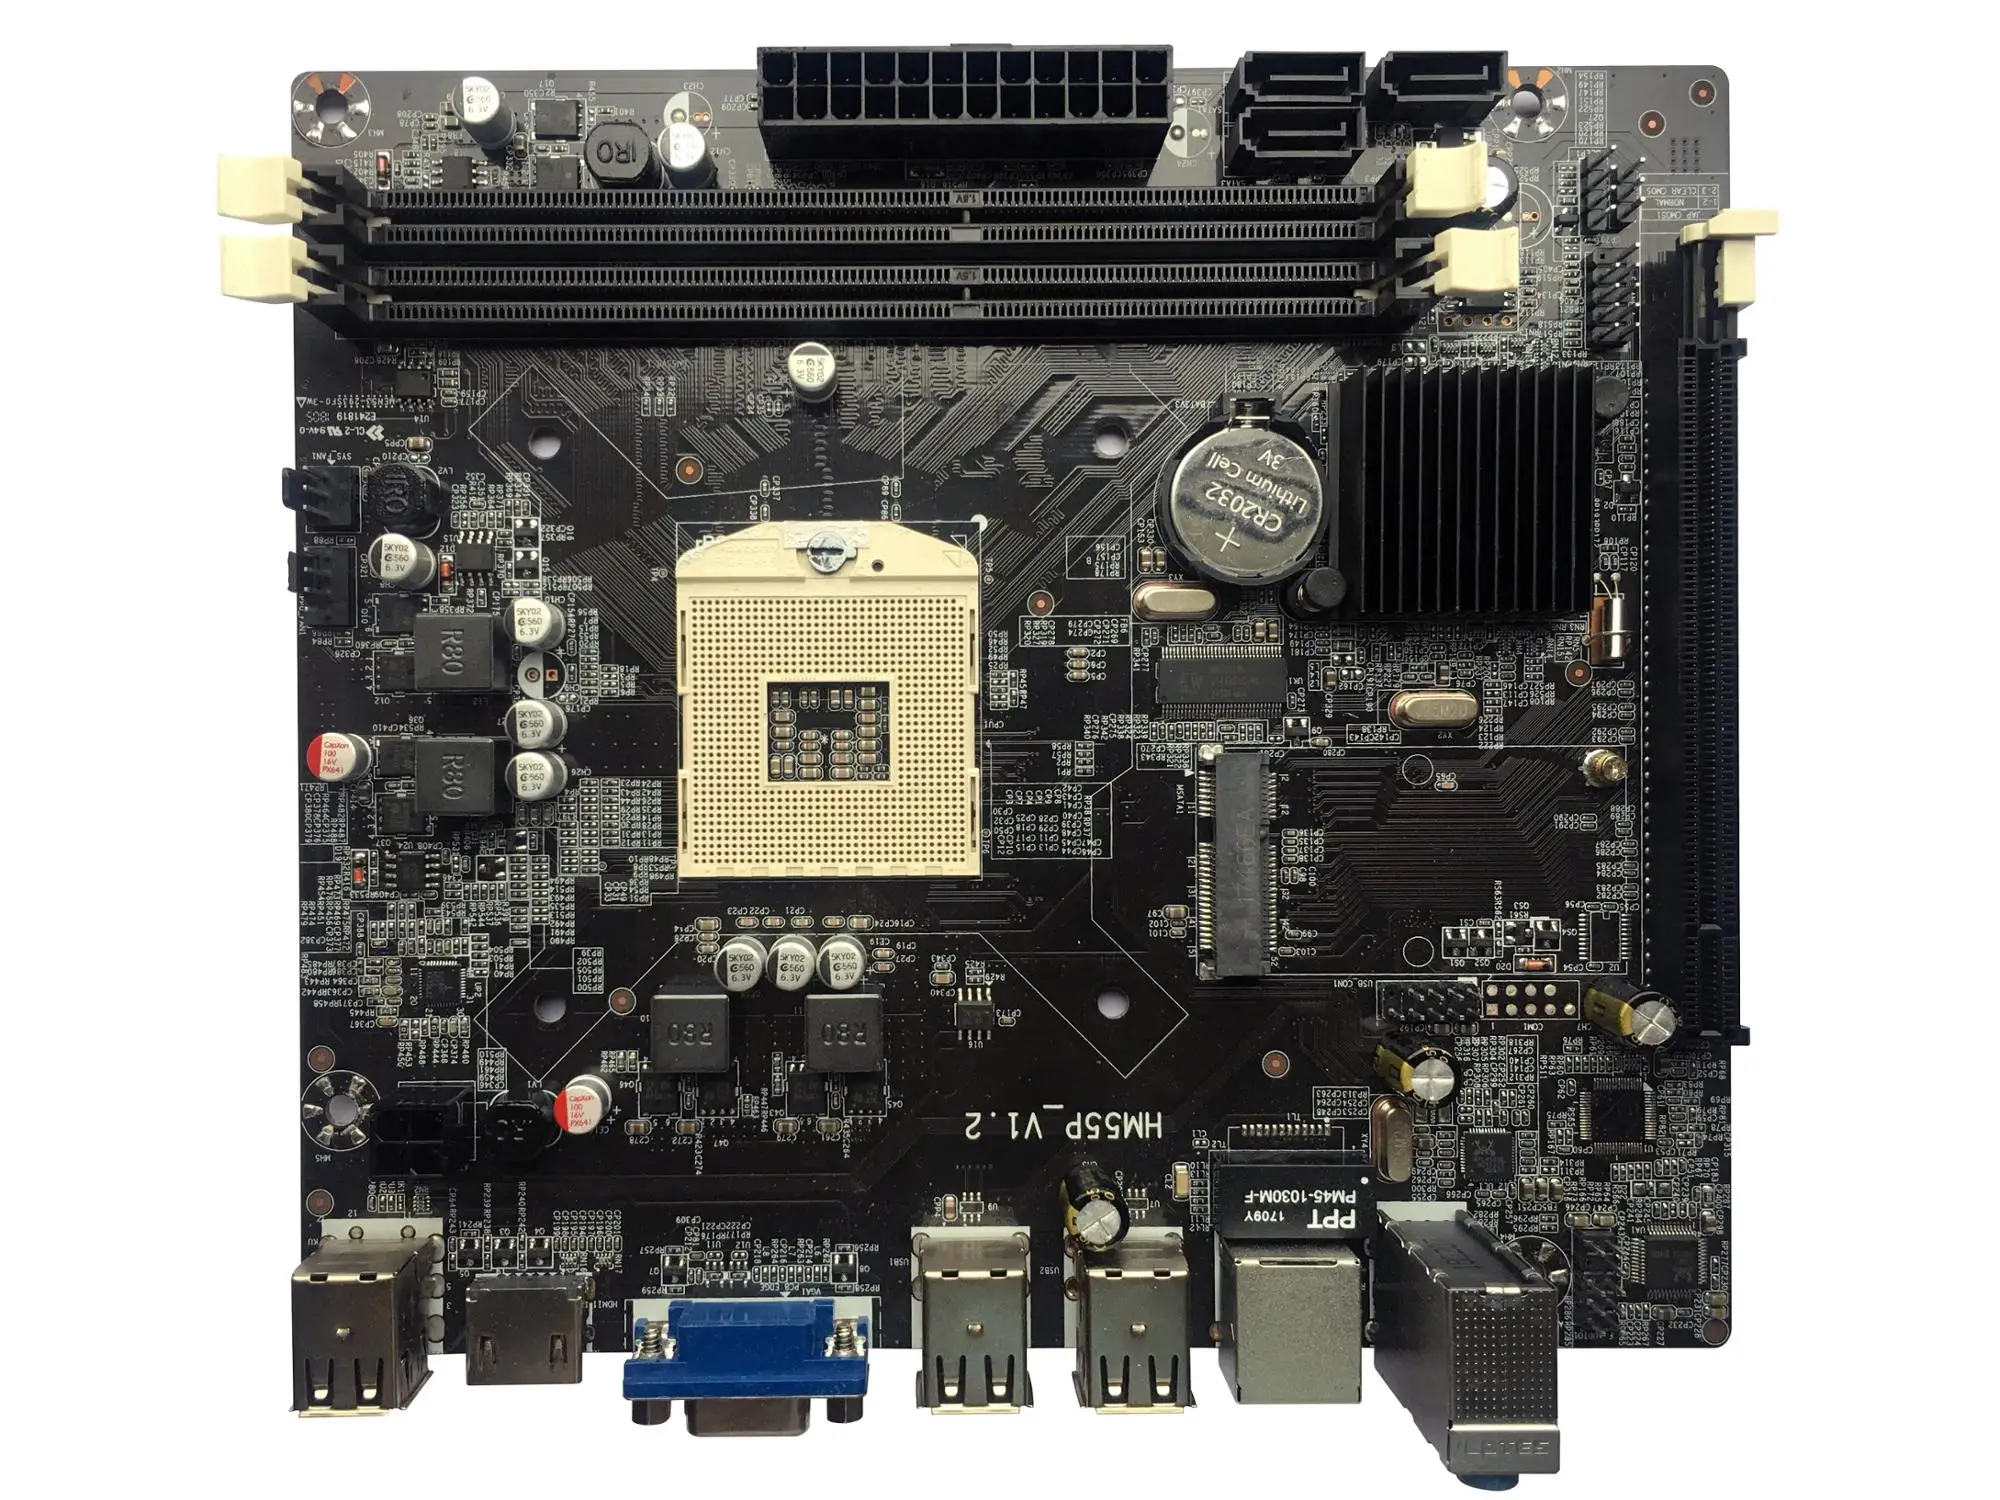 Intel H55 Motherboard Pga9 With I3 I5 I7 Cpu Combo I5 430m I5 540m I5 580m Processor Buy Hm55 Motherboard 1156 Motherboard H55 Motherboard Product On Alibaba Com